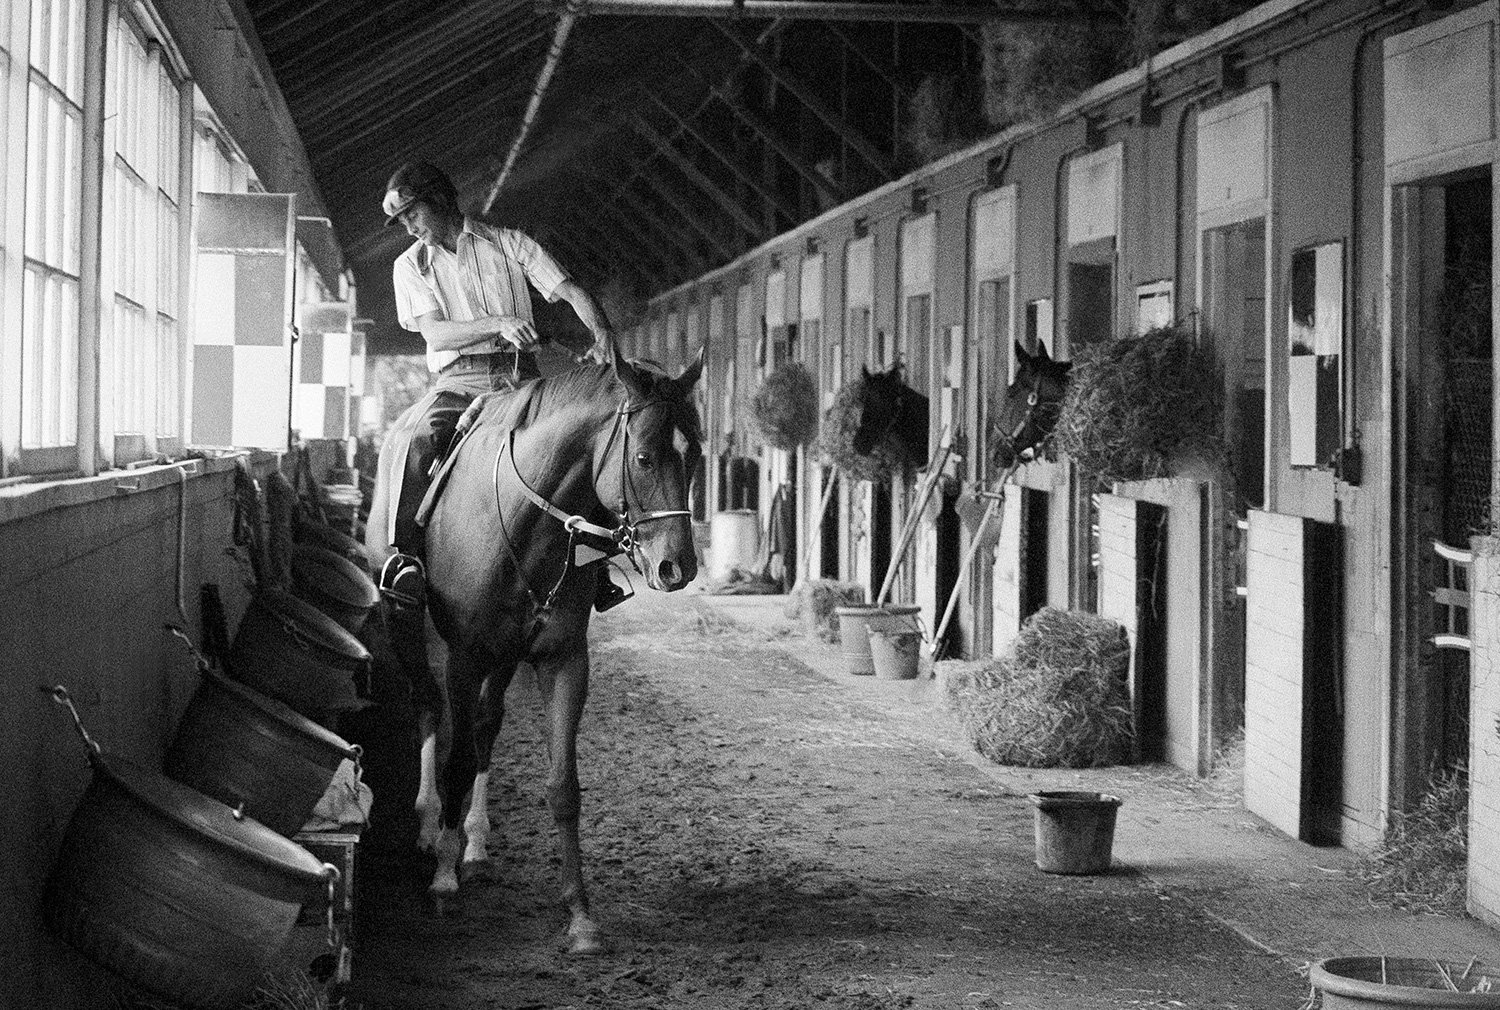  With his sights set for victory in the June 9 Belmont Stakes to capture the Triple Crown, Secretariat works out with an exercise rider in the shed row at Belmont Park in Elmont, N.Y., May 23, 1973. The horse loosened up indoors to avoid rainy weathe